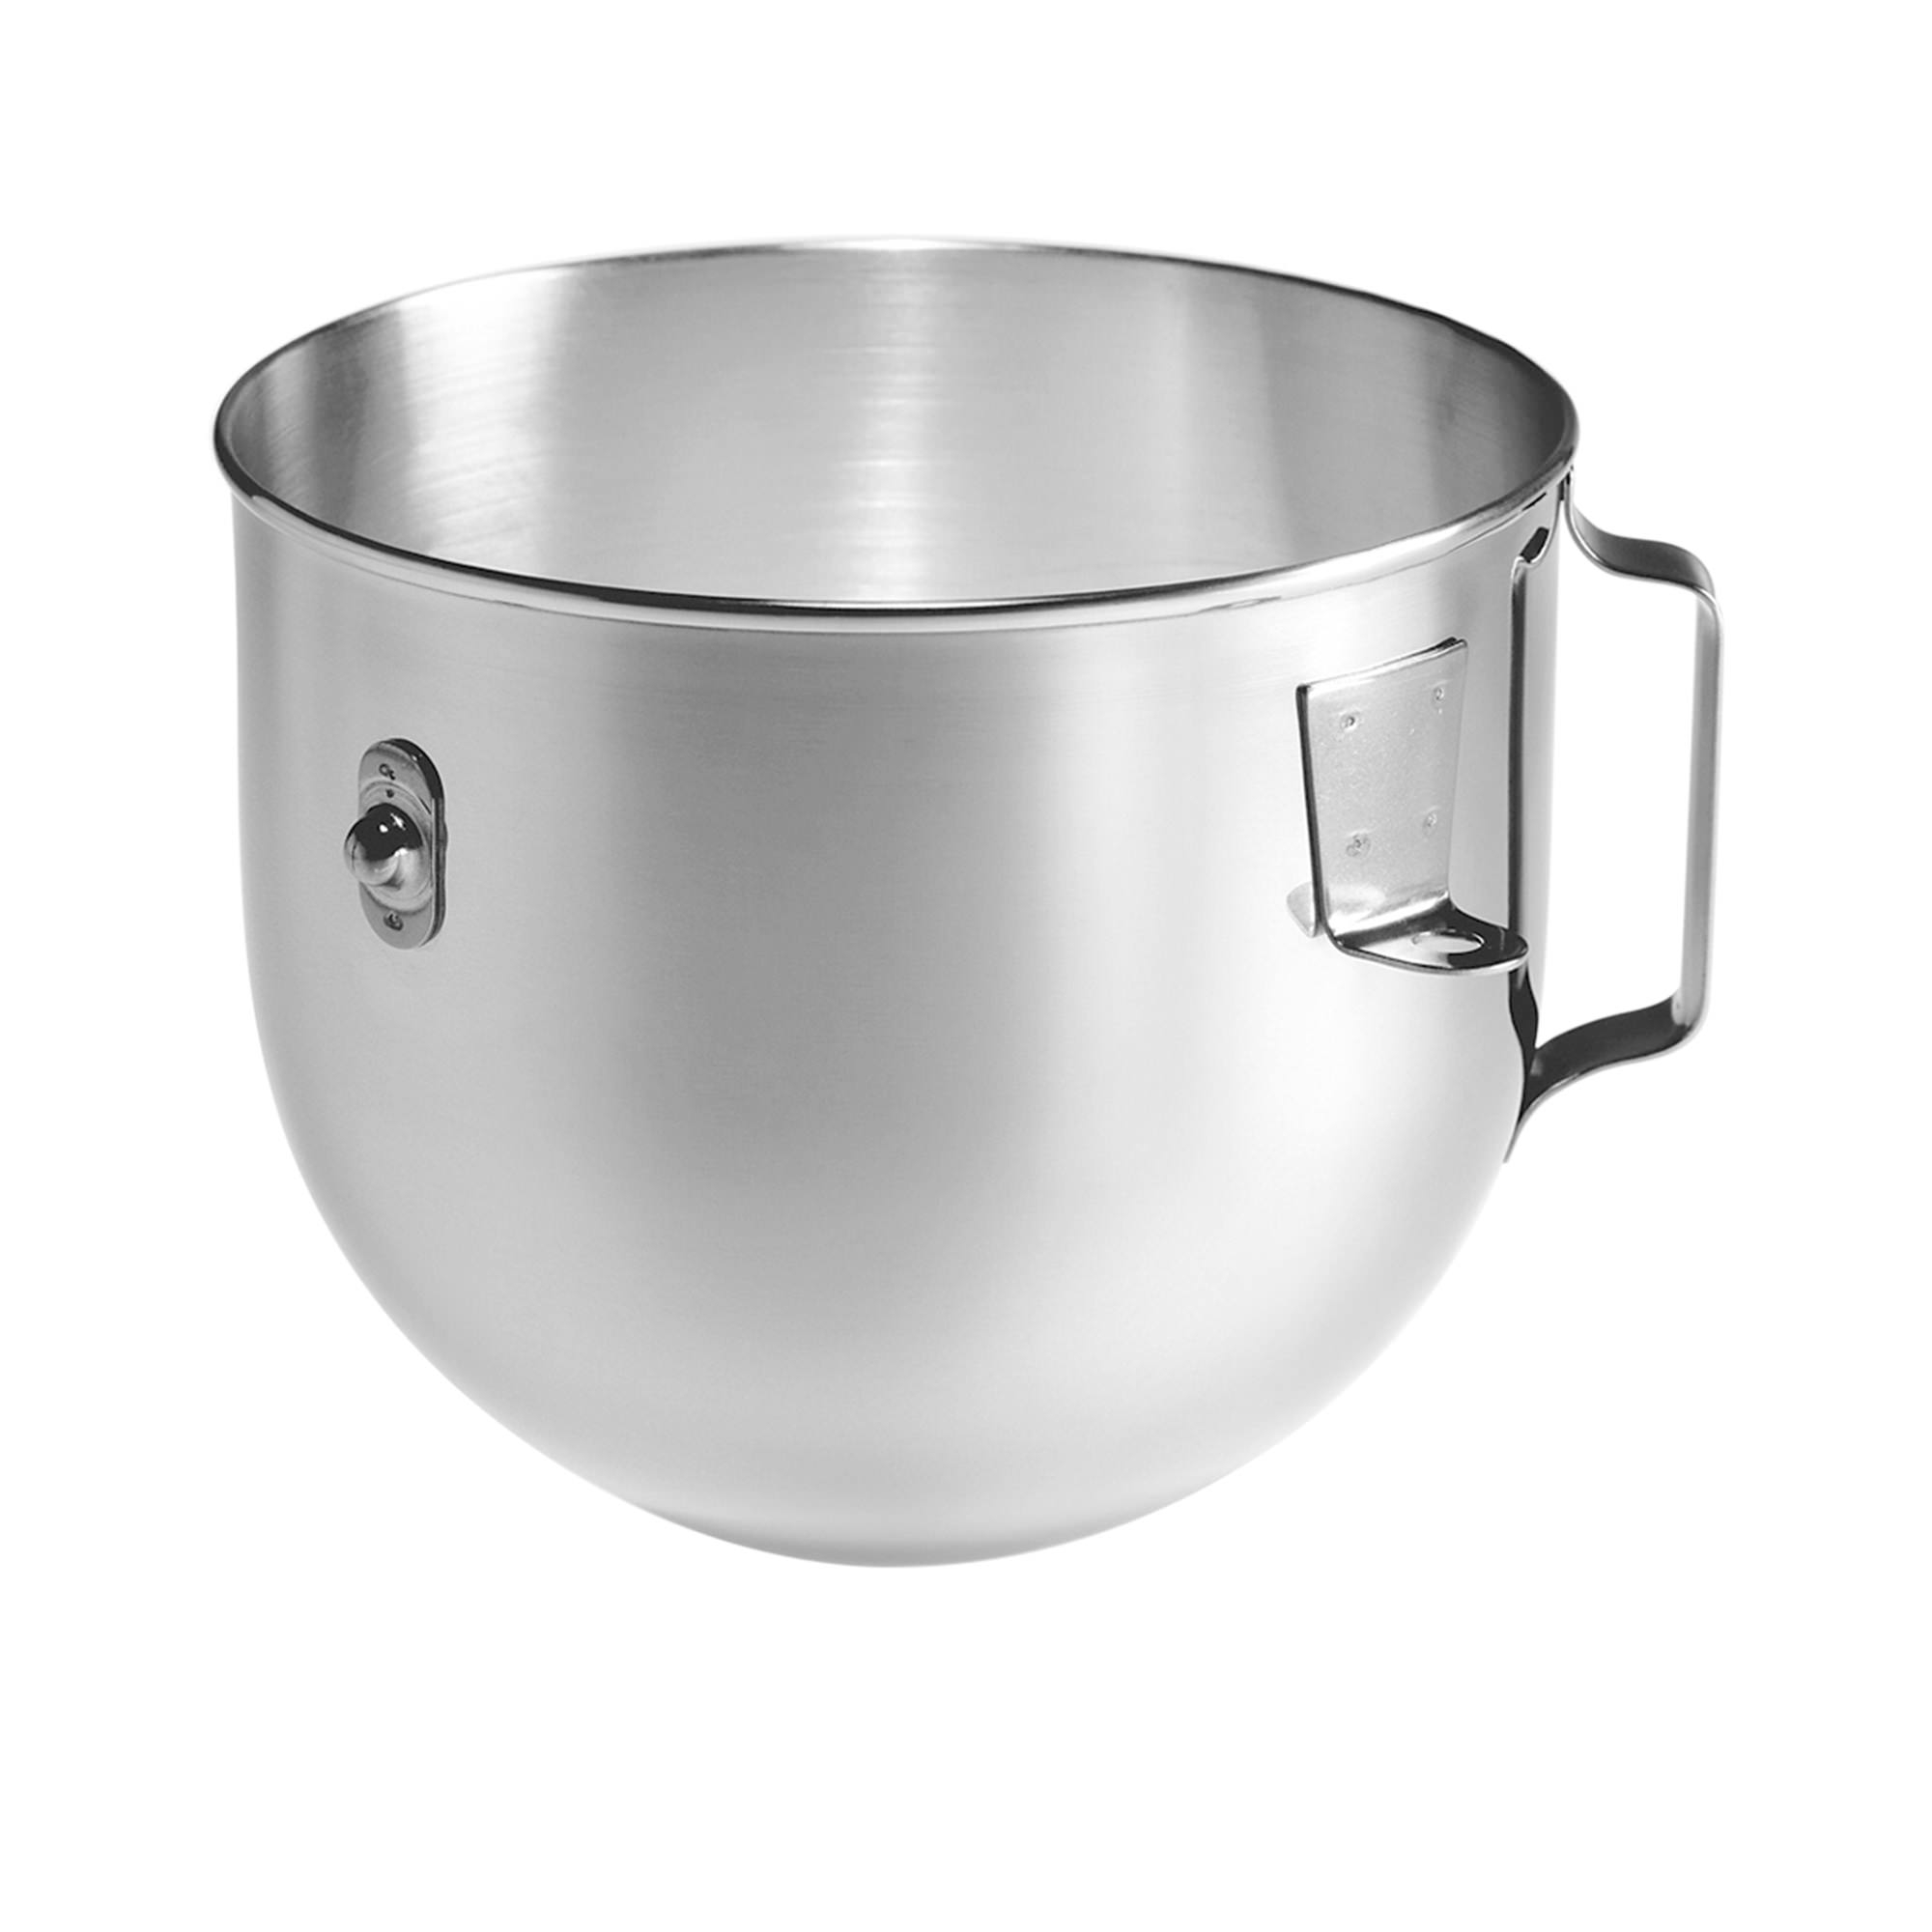 KitchenAid Stainless Steel Mixing Bowl for Bowl-Lift Stand Mixer 4.8L Image 1